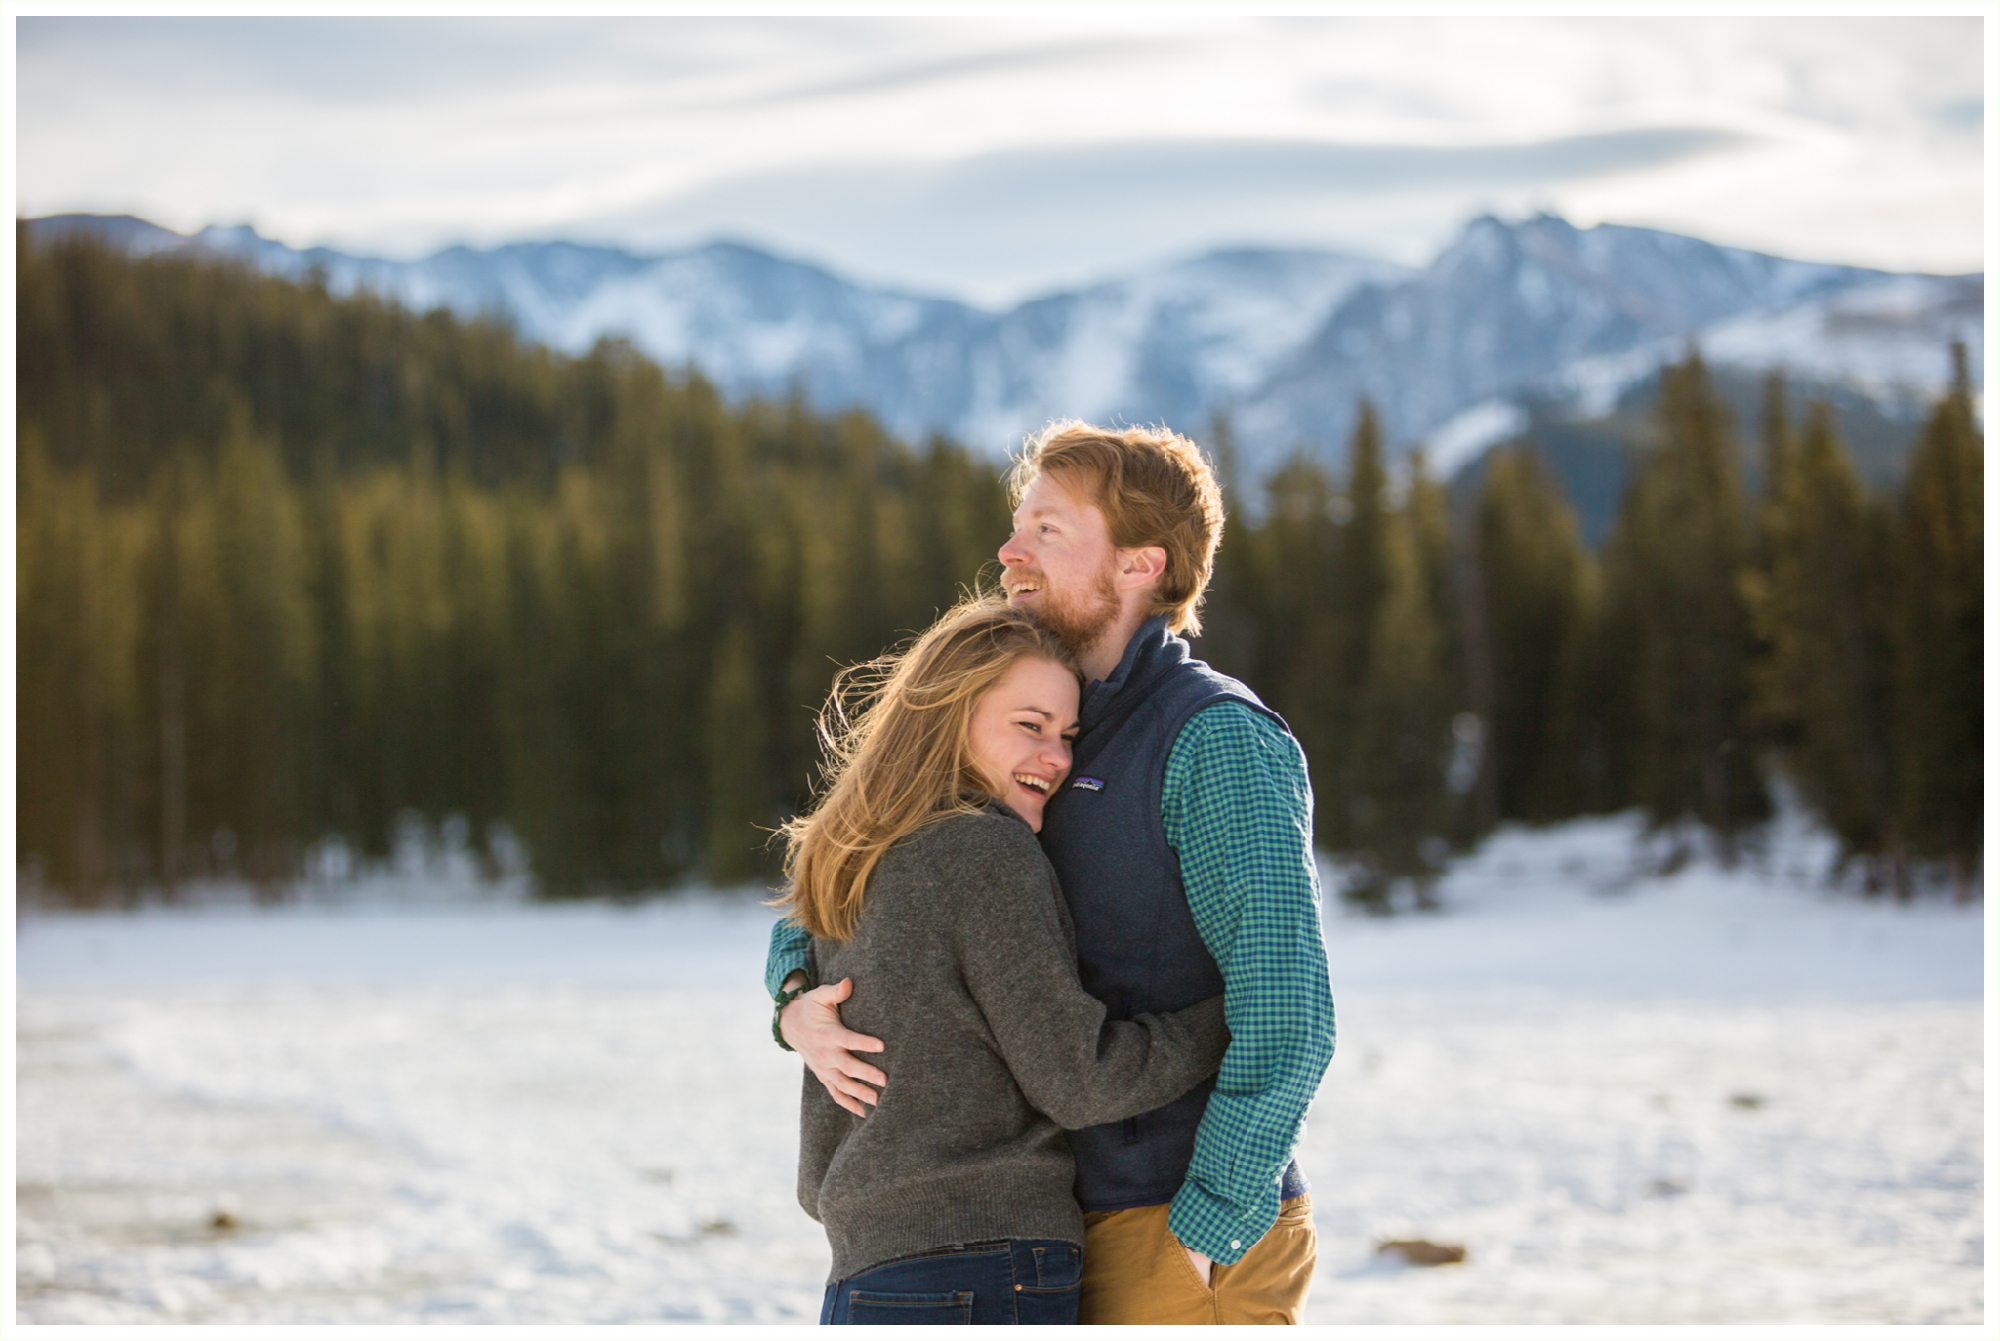 Echo Lake Park winter engagement session in the Colorado mountains. Colorado mountain wedding photographer. Colorado engagement photographer. natural candid Colorado engagement photography. Outdoor winter engagement photos in Colorado mountains. Colorado mountain wedding photographer. grey top and button down with outdoorsy vest winter engagement outfits